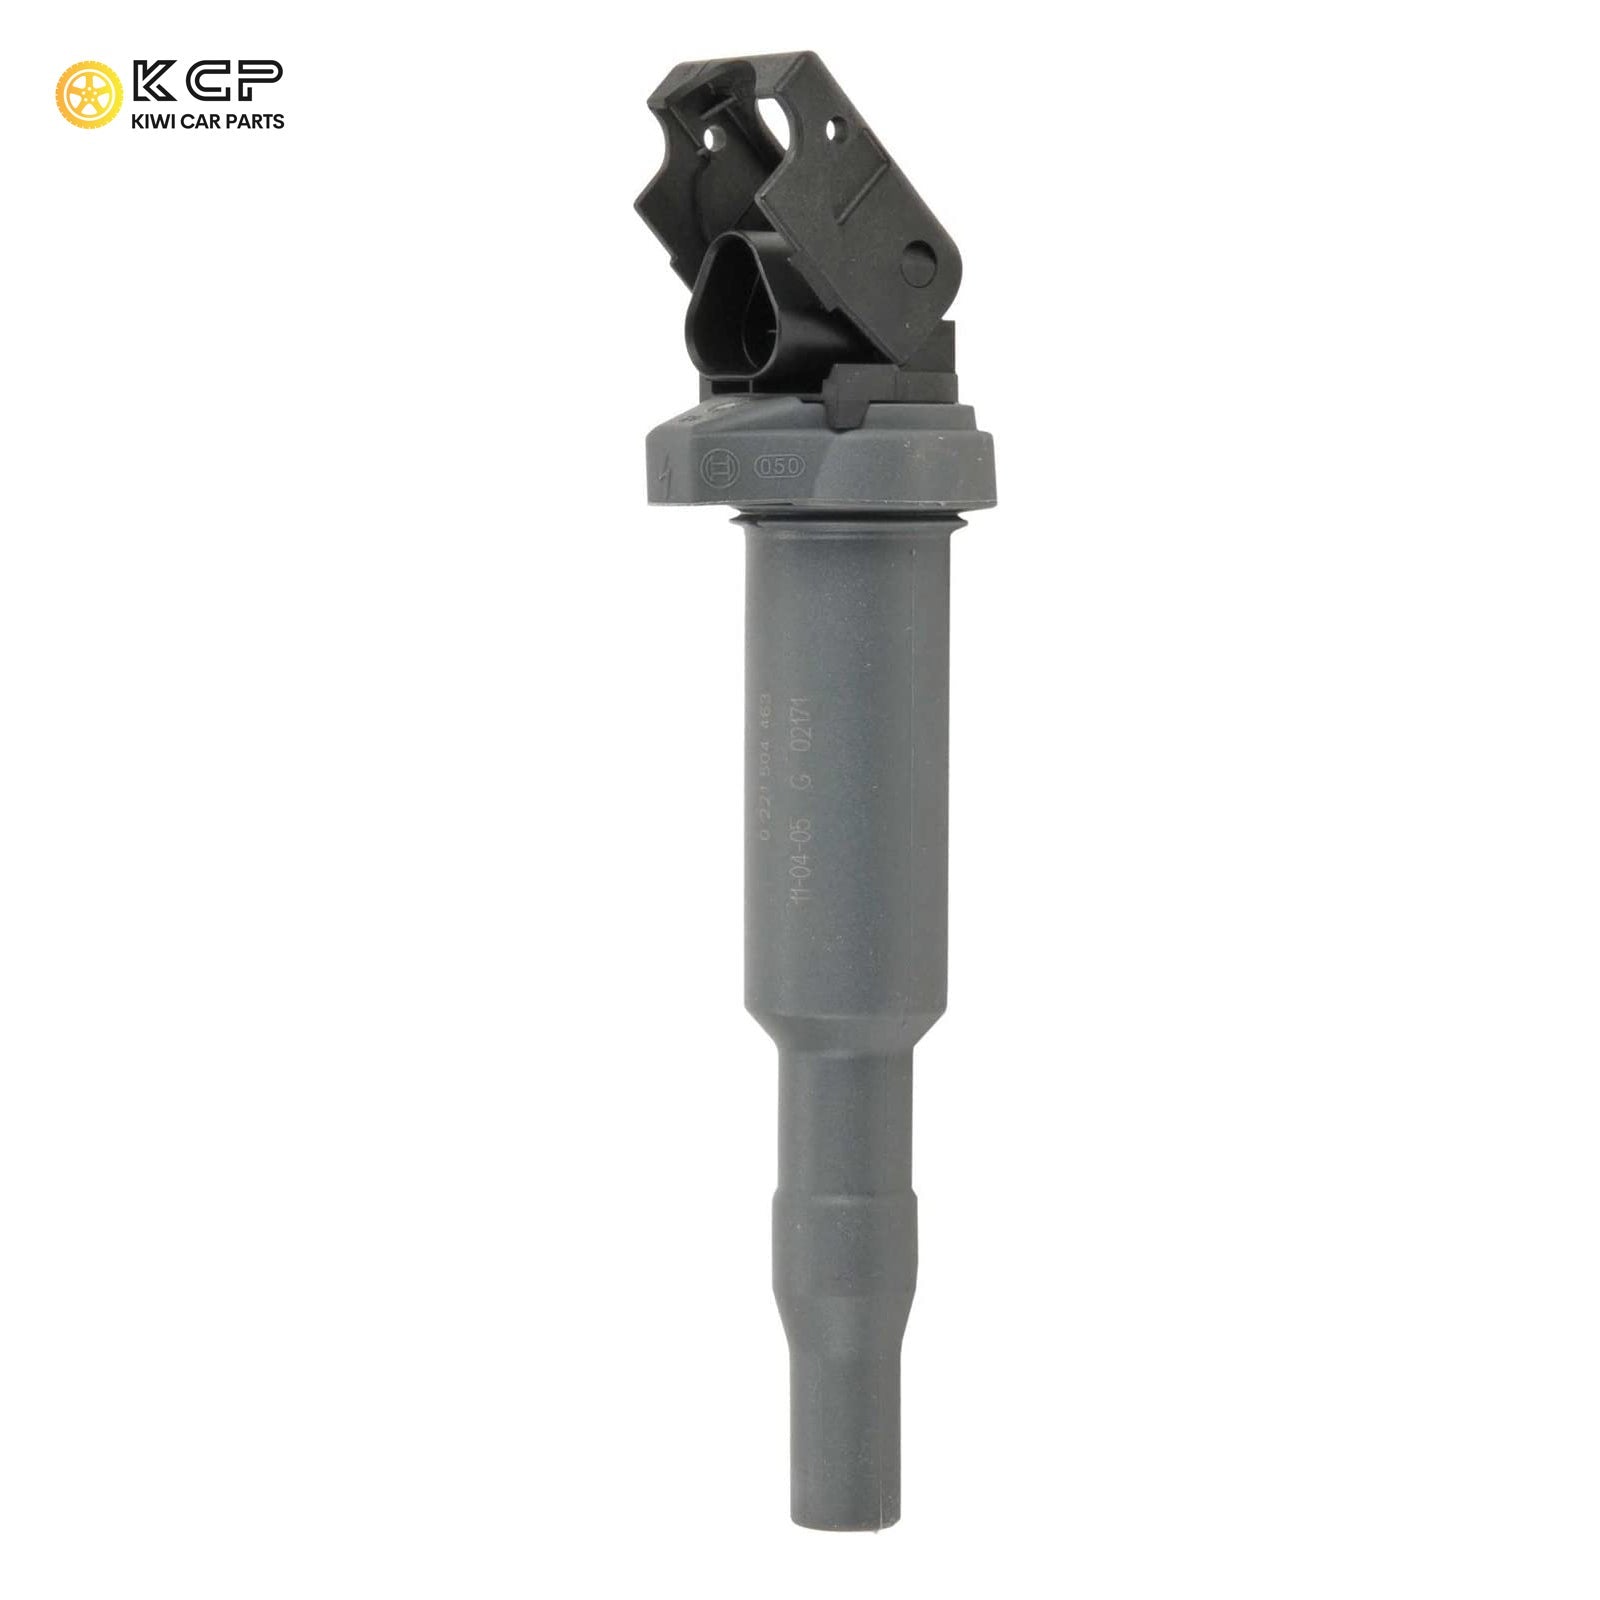 BMW Ignition Coil 12137594936 OEM BOSCH 0221504465 Suitable For BMW 323i, 325i, 325xi, 330i, 330xi, 525i, 525xi, 530i, 530xi, Z4 Car Ignition Coils 0221504463